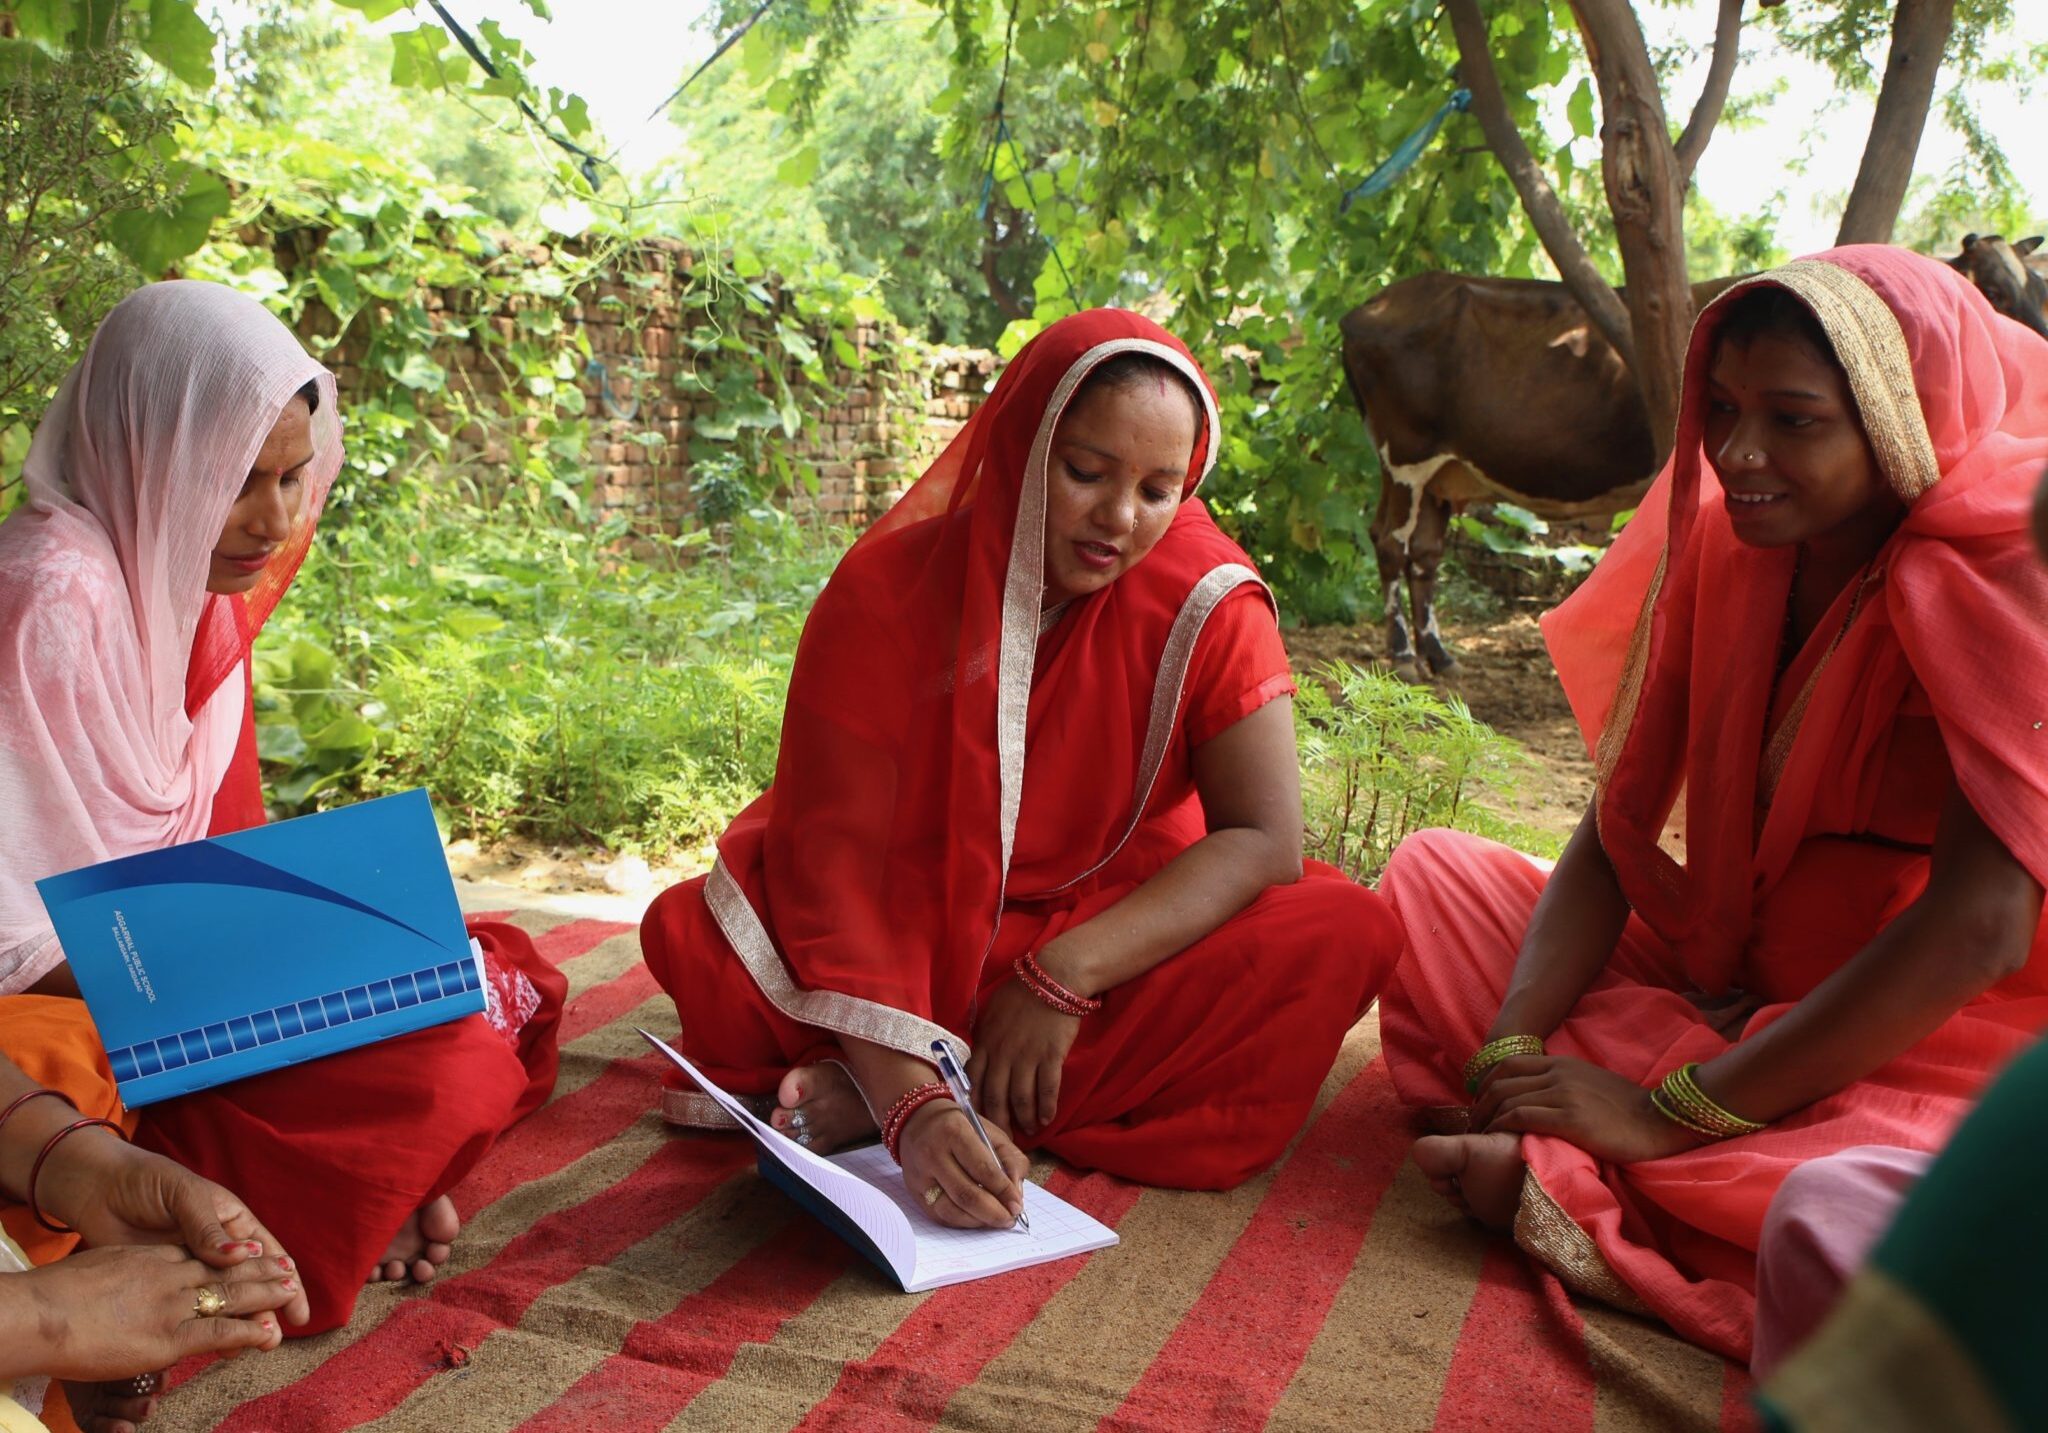 Jagwati, a community health worker, meets with a group of women in her village in India. She finds that women are often embarrassed or fearful to discuss their reproductive health, including issues like cervical cancer.